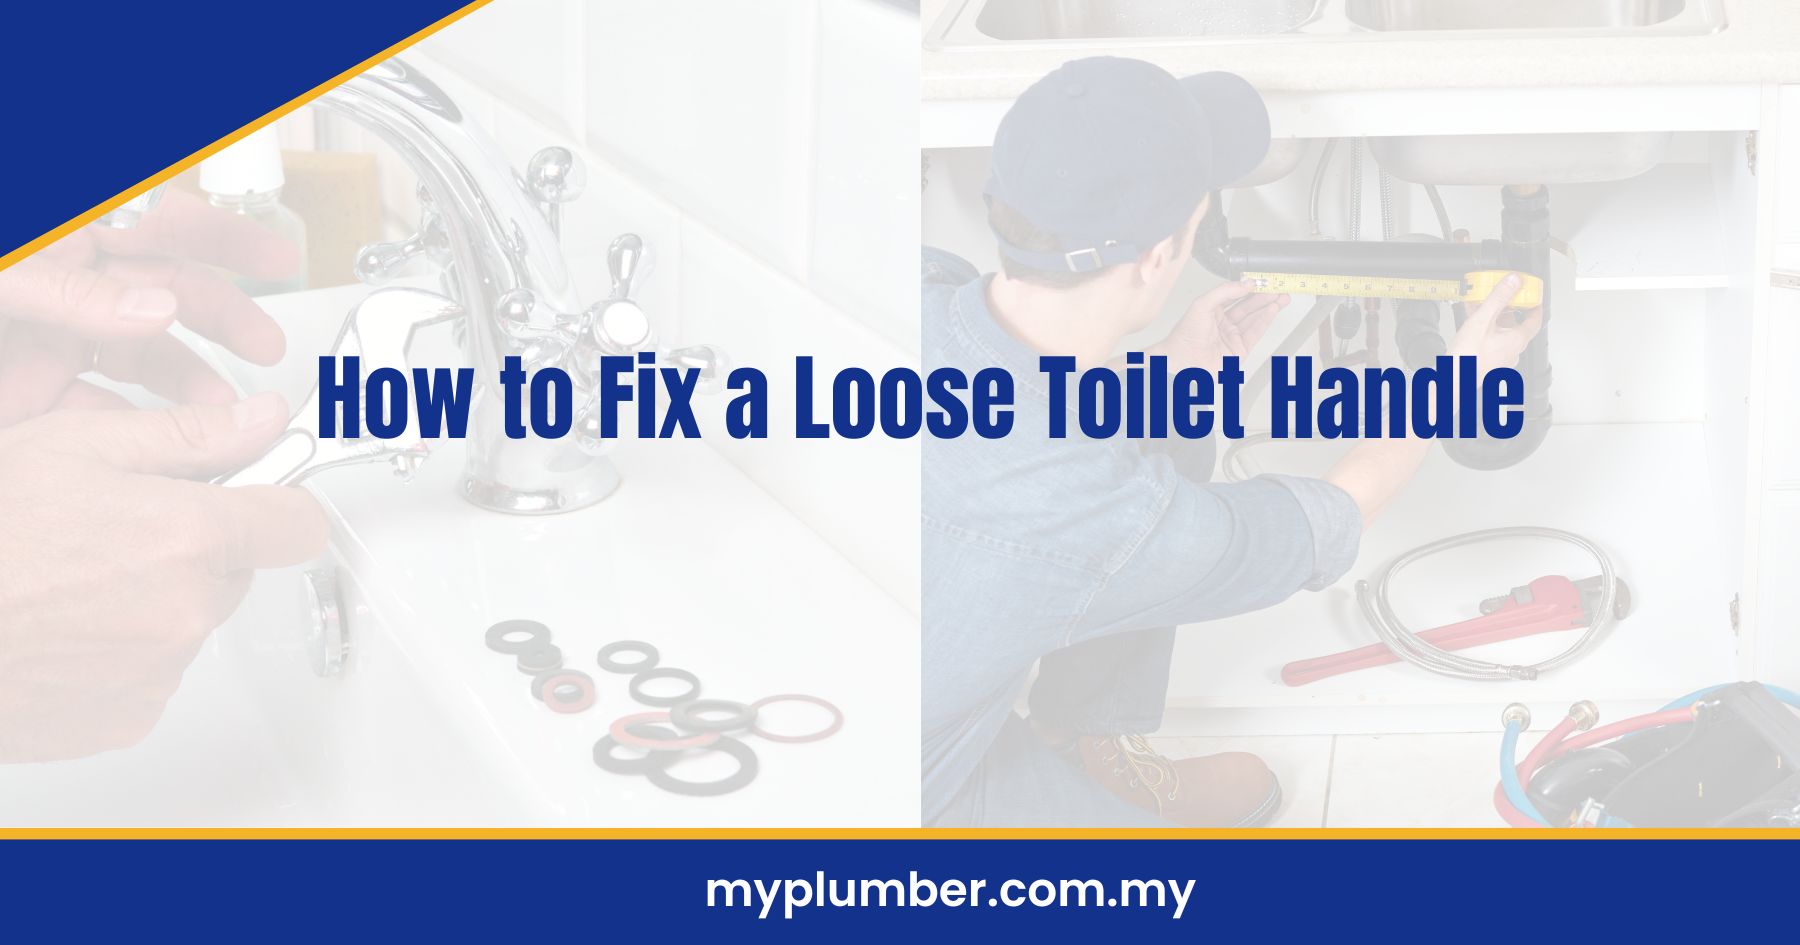 How to Fix a Loose Toilet Handle